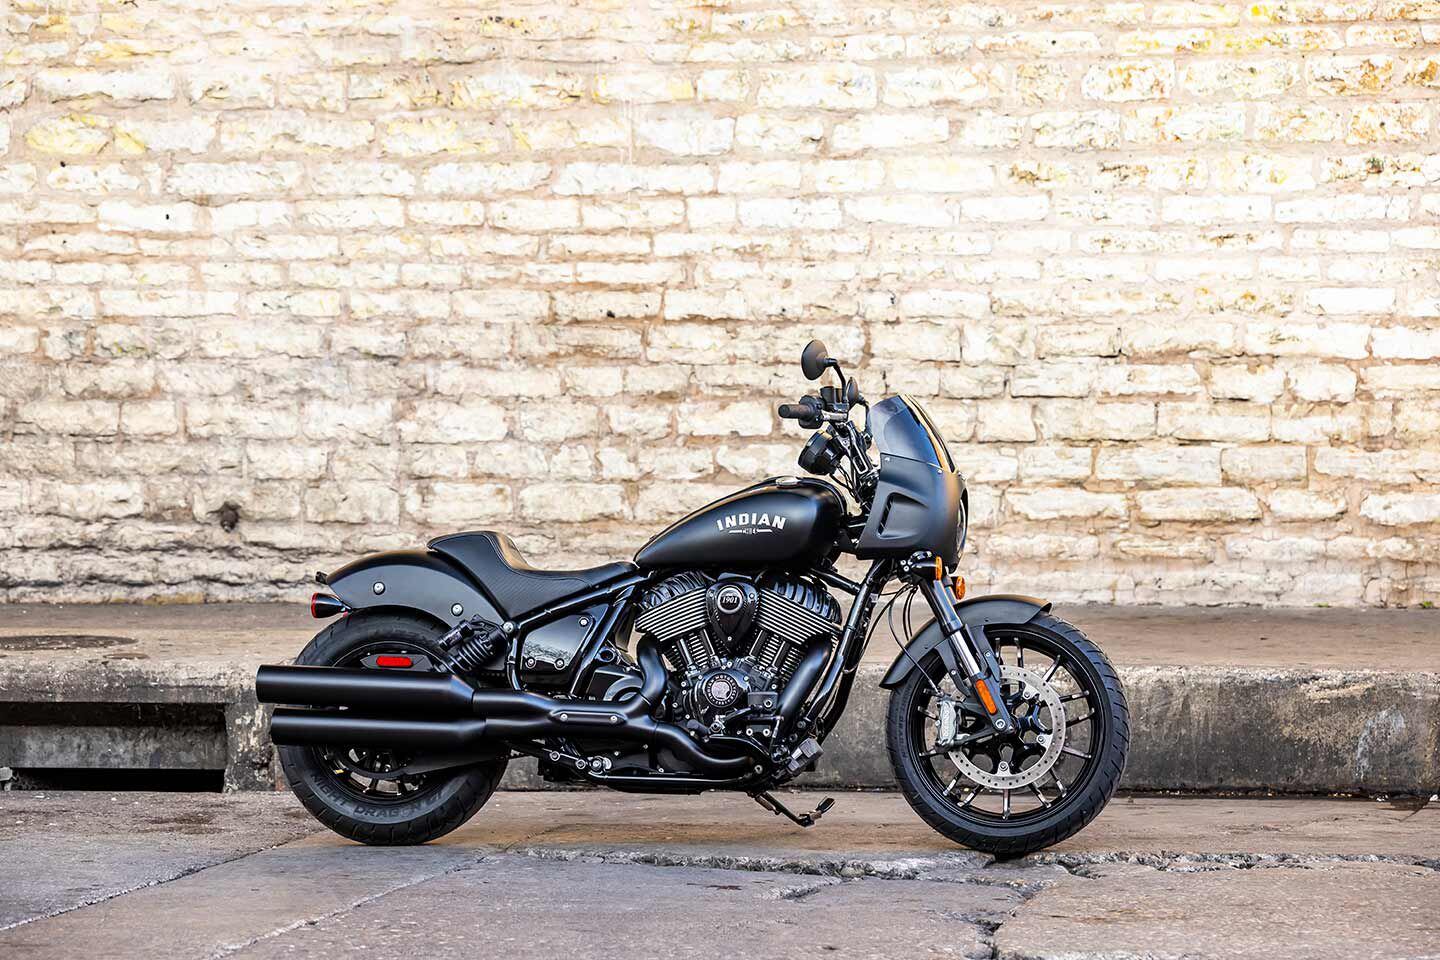 Fox shocks and a quarter fairing define the Sport Chief, but it’s hard to ignore the big Thunderstroke 116ci engine.